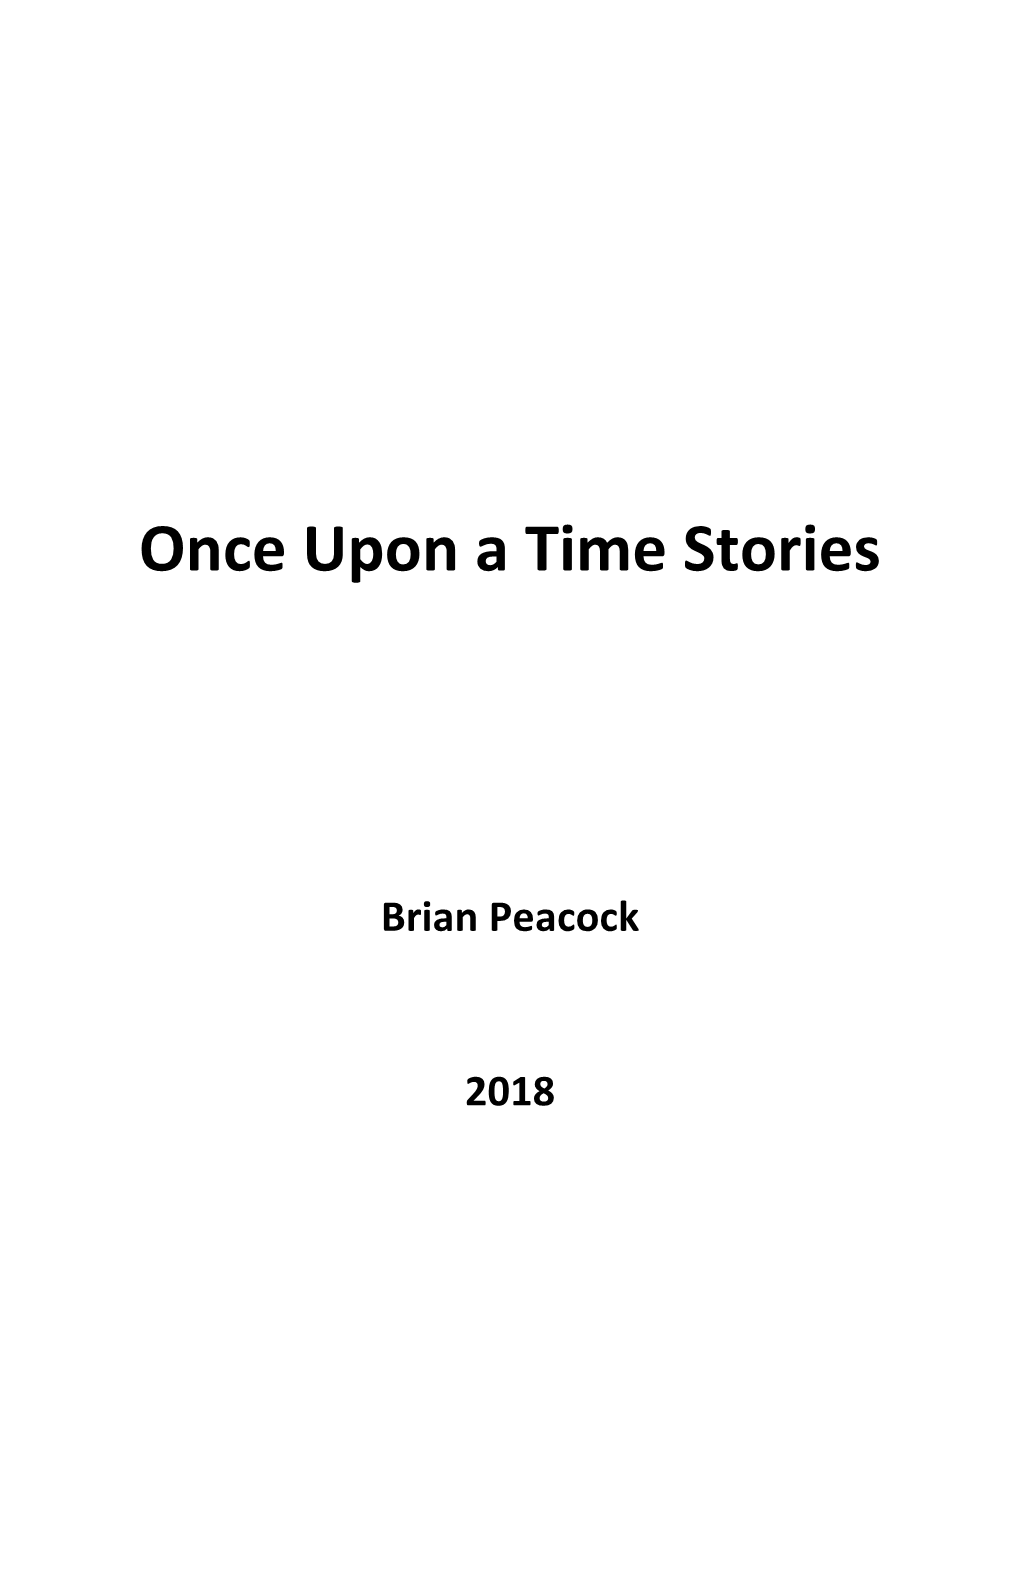 Once Upon a Time Stories